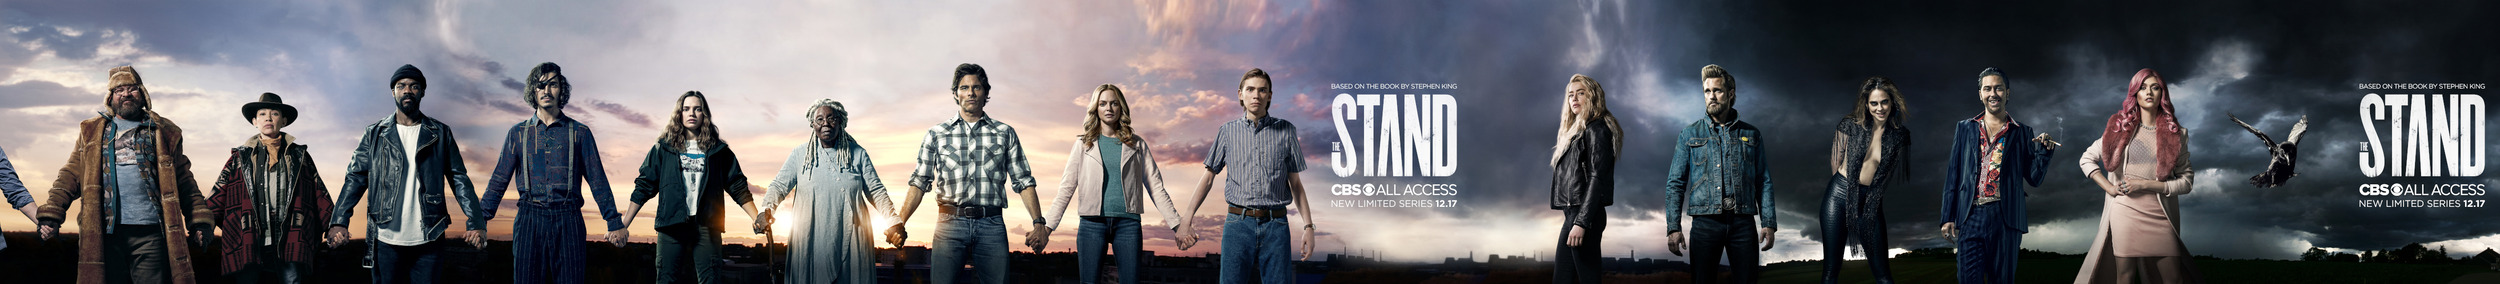 Extra Large TV Poster Image for The Stand (#8 of 8)